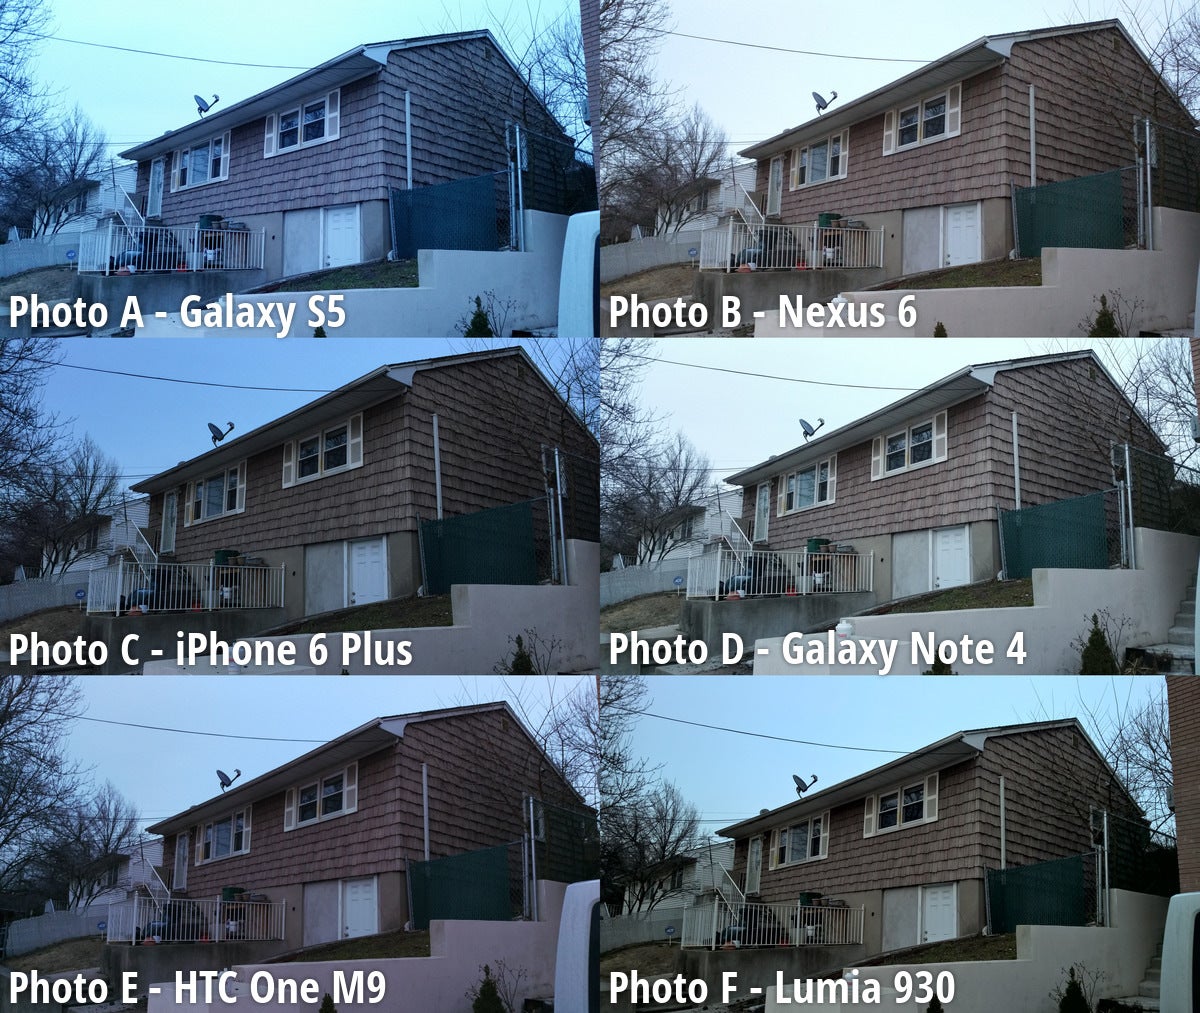 Side-by-side preview - Nokia Lumia 930 wins our blind camera comparison, followed by Galaxy Note 4; HTC One M9 ends up last